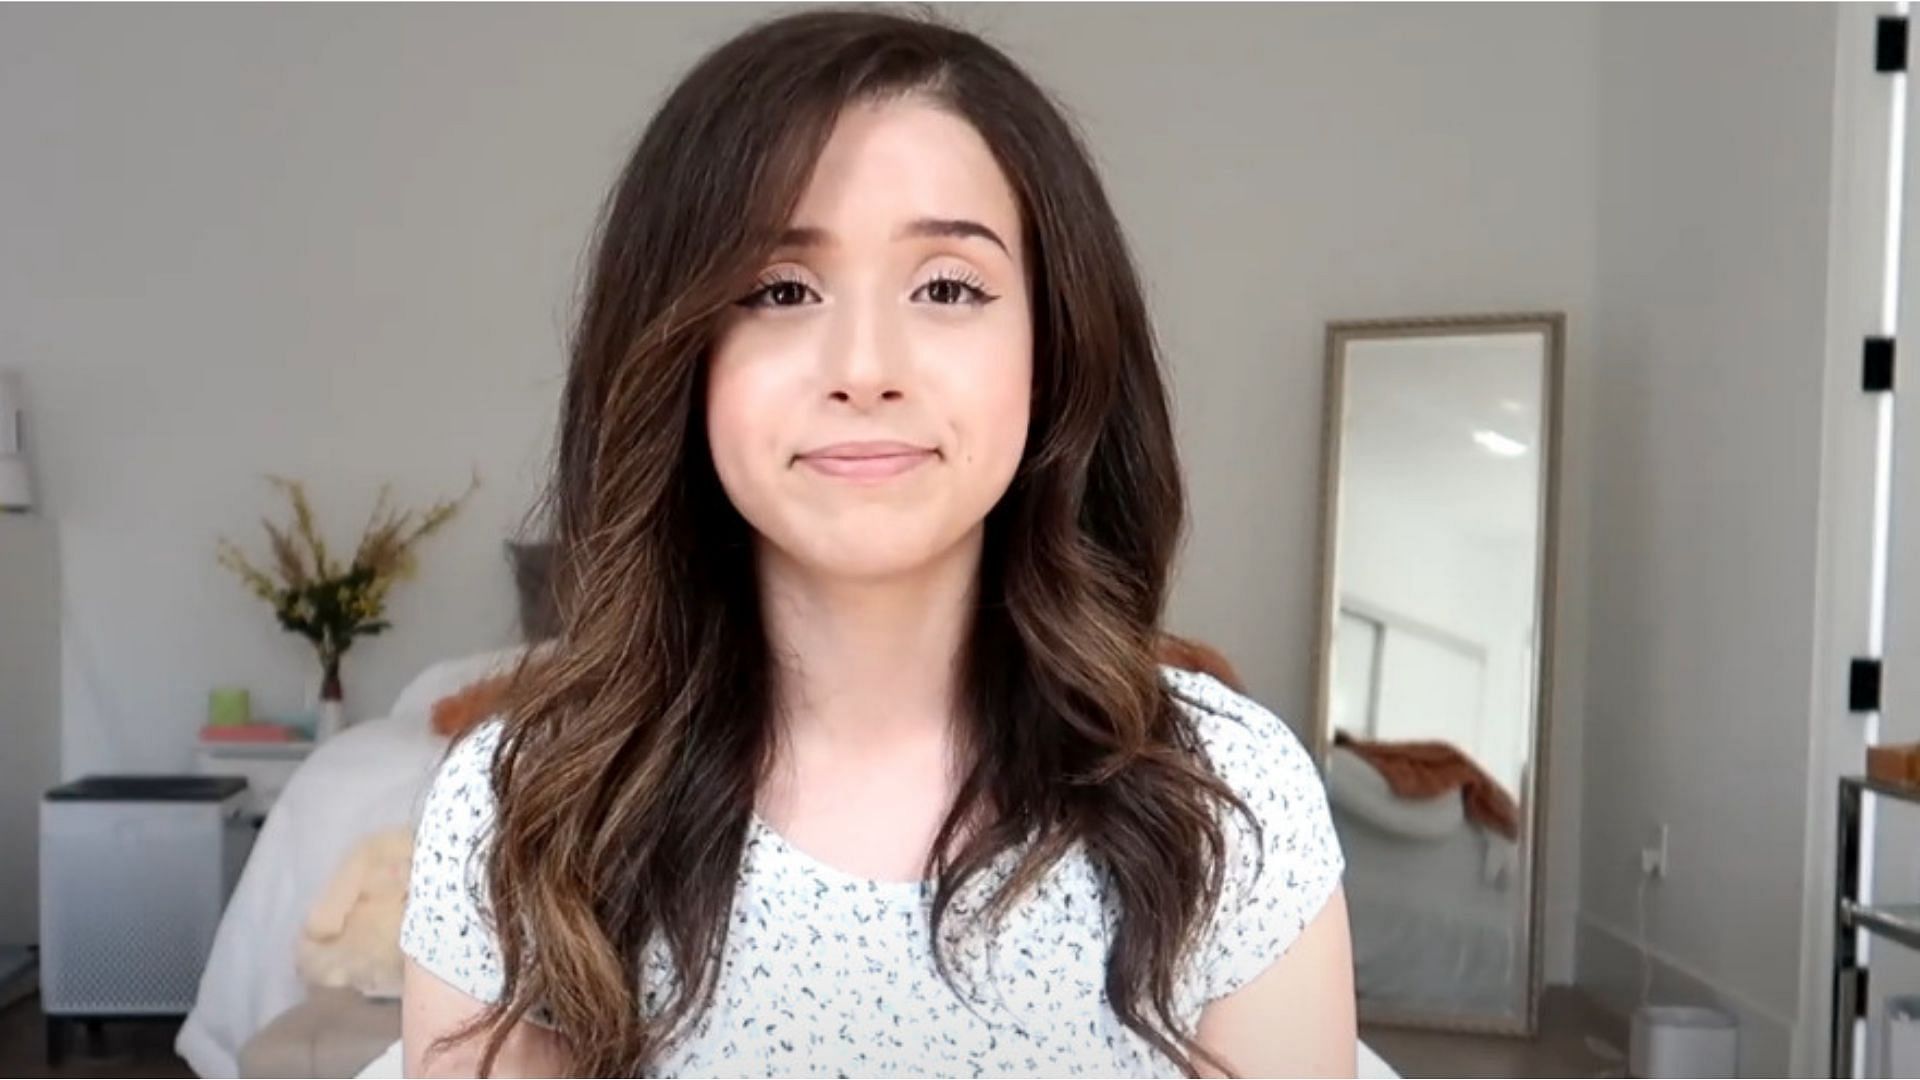 Pokimane snaps back at obsessive fans trying to pry into her personal life (Image via Pokimane on YouTube)